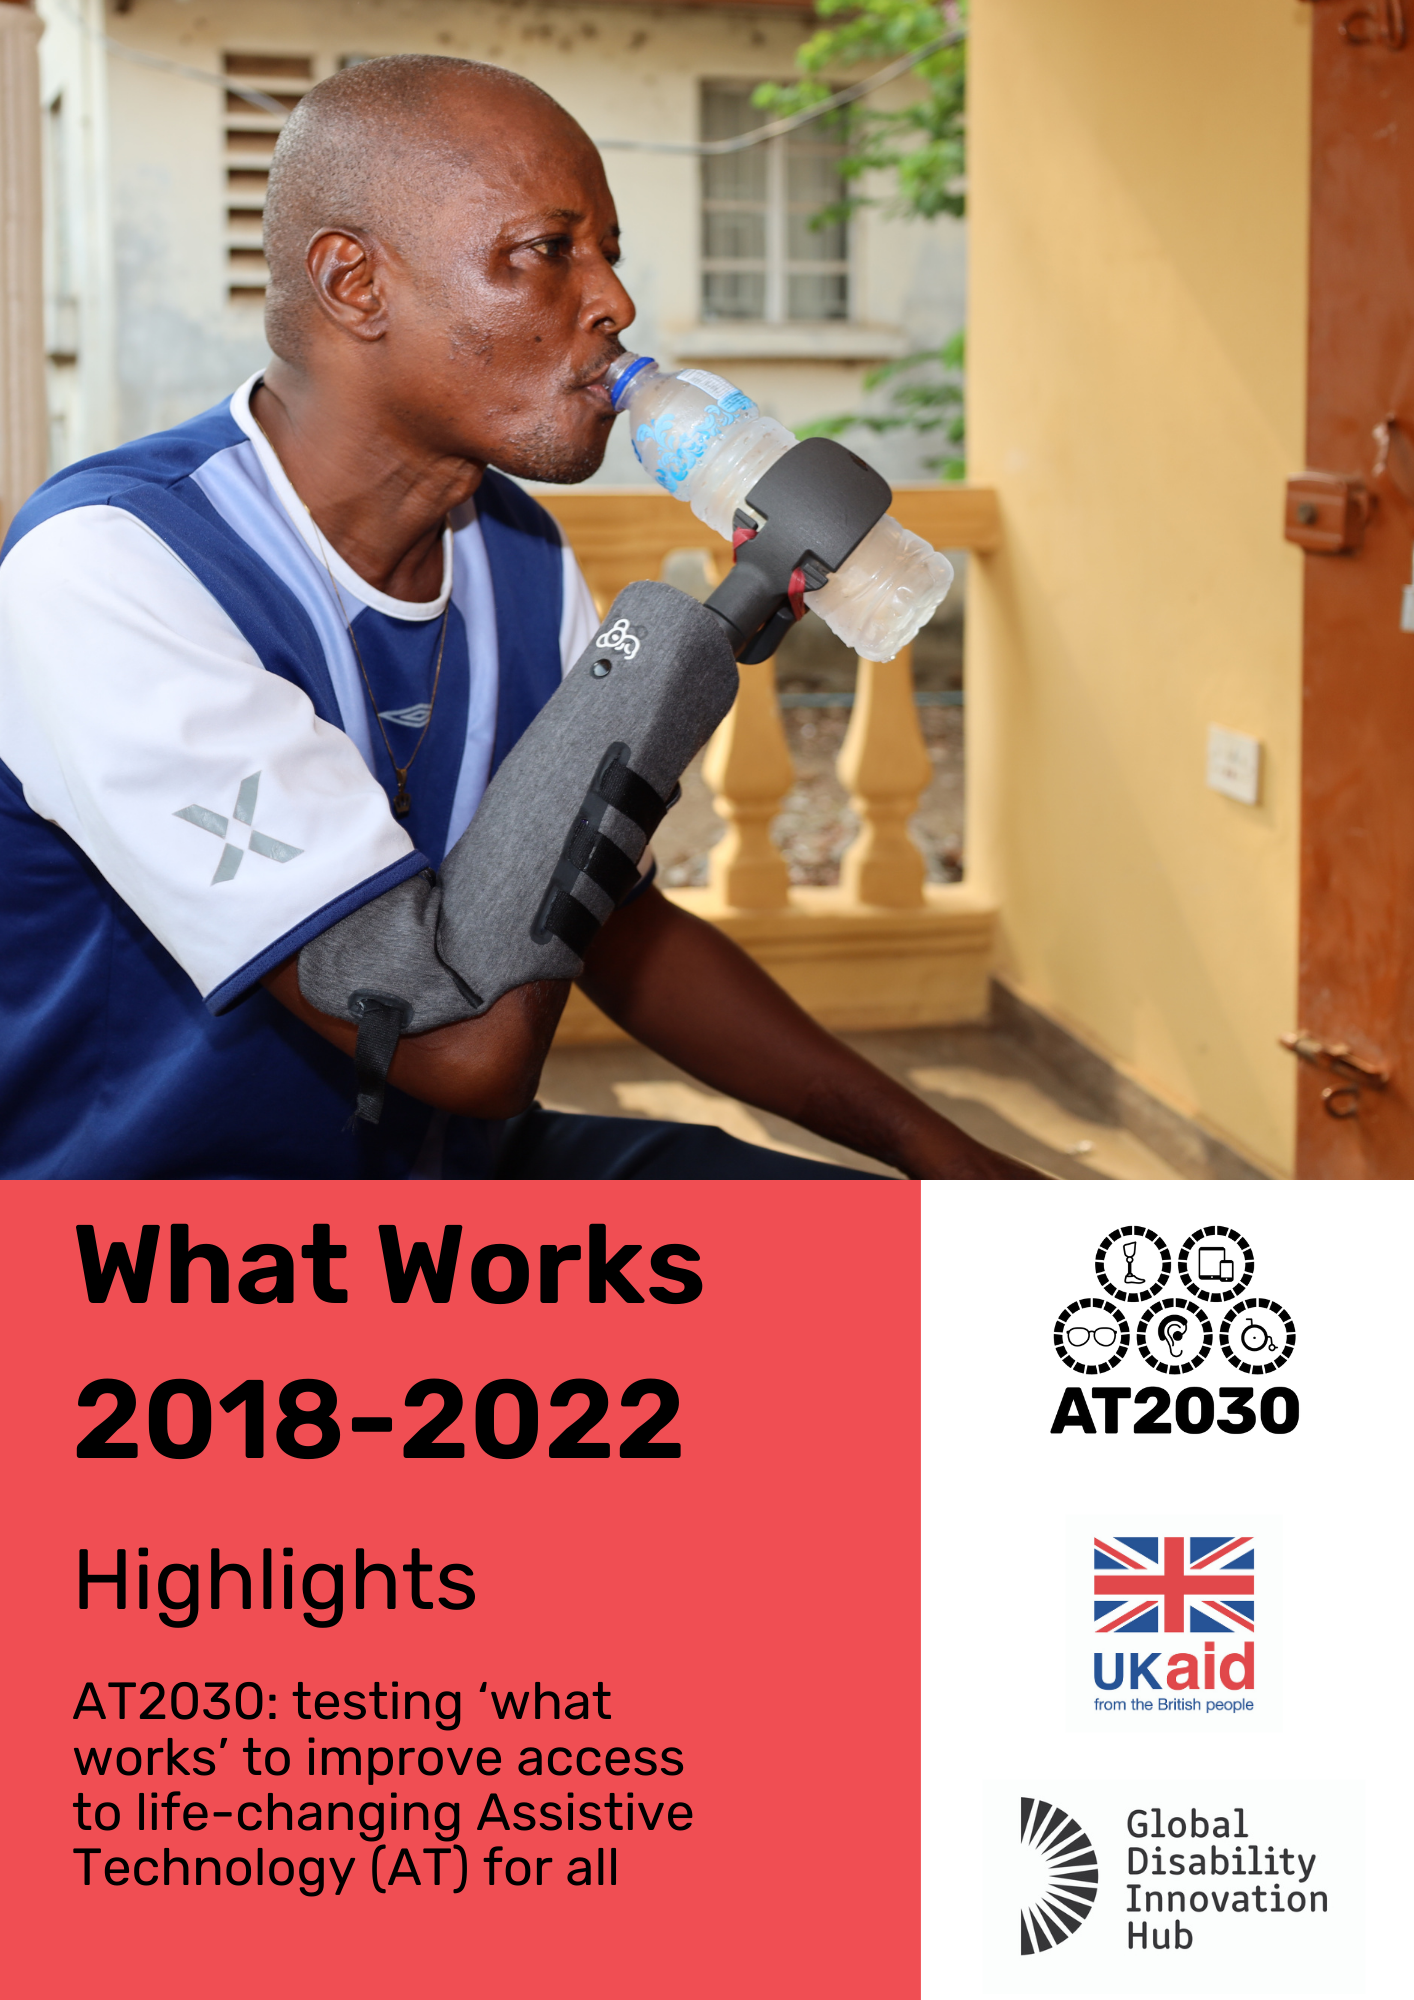 Front cover of the What Works highlight report. A man is photographed drinking from a water bottle using an upper limb prosthesis. The report text is 'What Works' 2018 - 2022 highlights. AT2030: testing ‘what works’ to improve access to life-changing Assistive Technology (AT) for all. AT2030, UK aid and GDI Hub logos are displayed. Cover Image